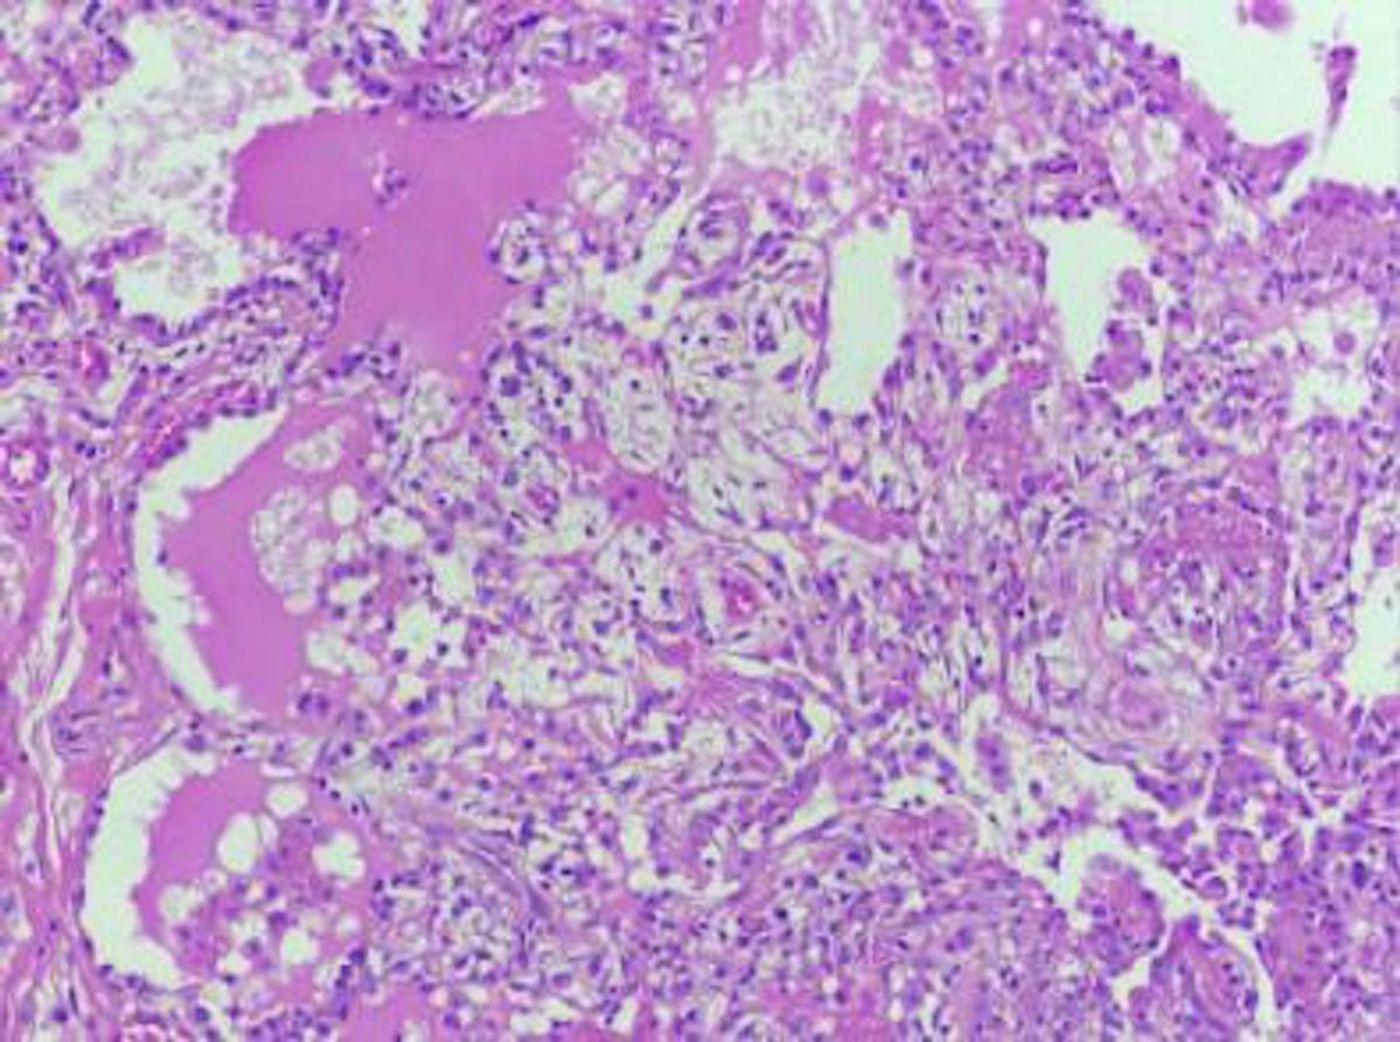 Lung tissue from patient with GATA2 deficiency, displaying pulmonary alveolar proteinosis and inflammatory lymphoplasmacytic infiltrate / Credit: CTC